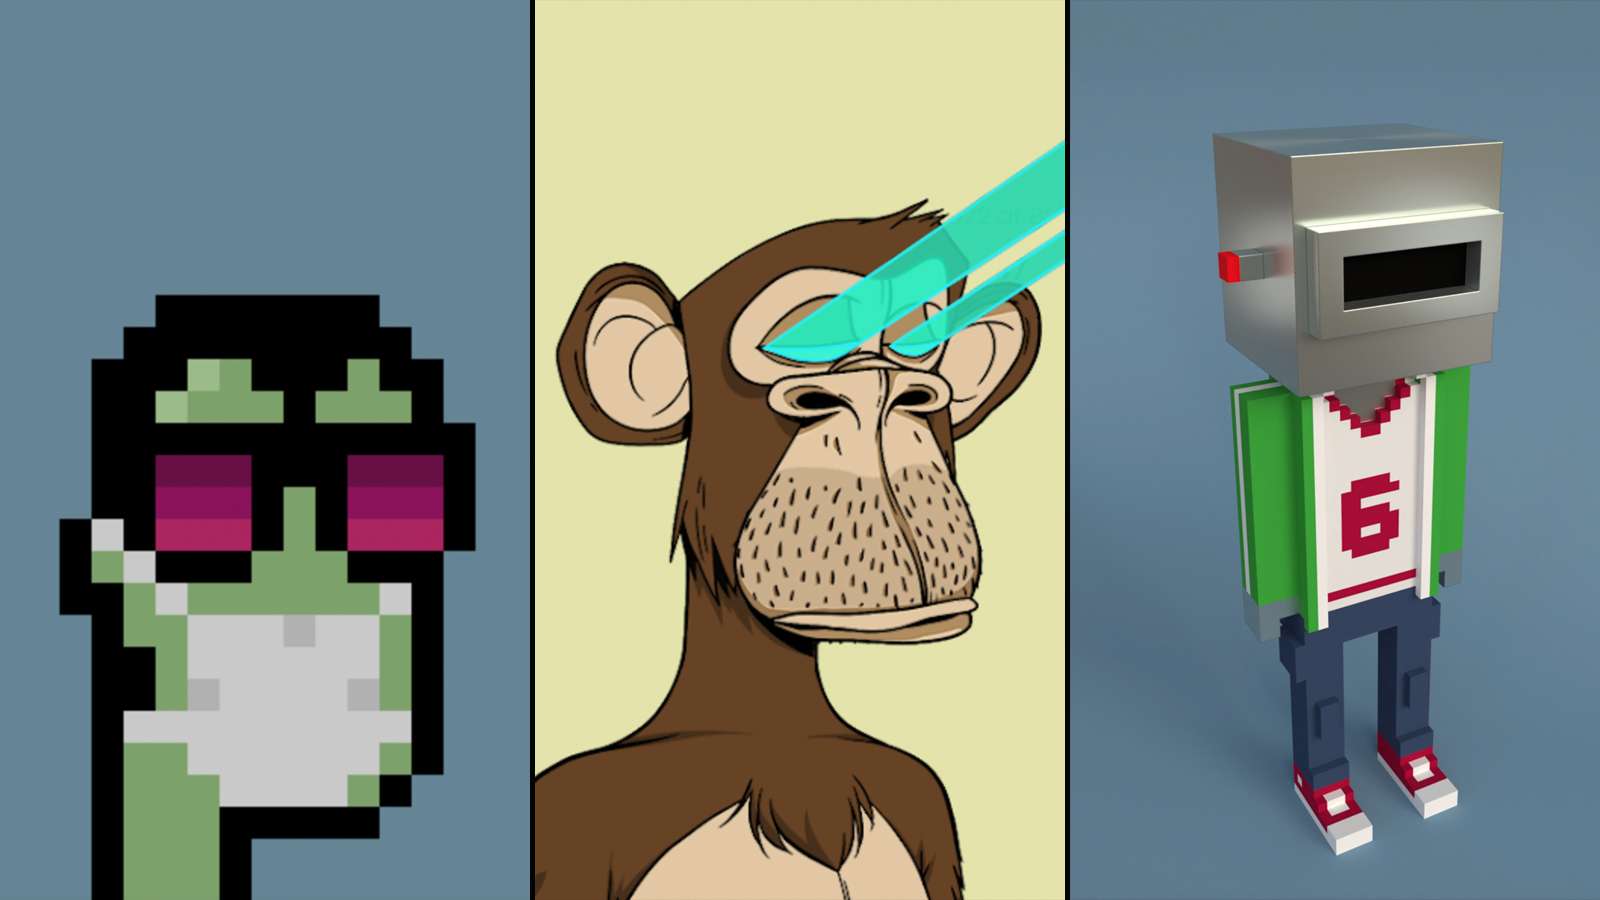 Three NFTs side-by-side: A Cryptopunk with green skin and pink glasses, a Bored Ape with blue laser eyes, and a Meebit with a silver robot head.